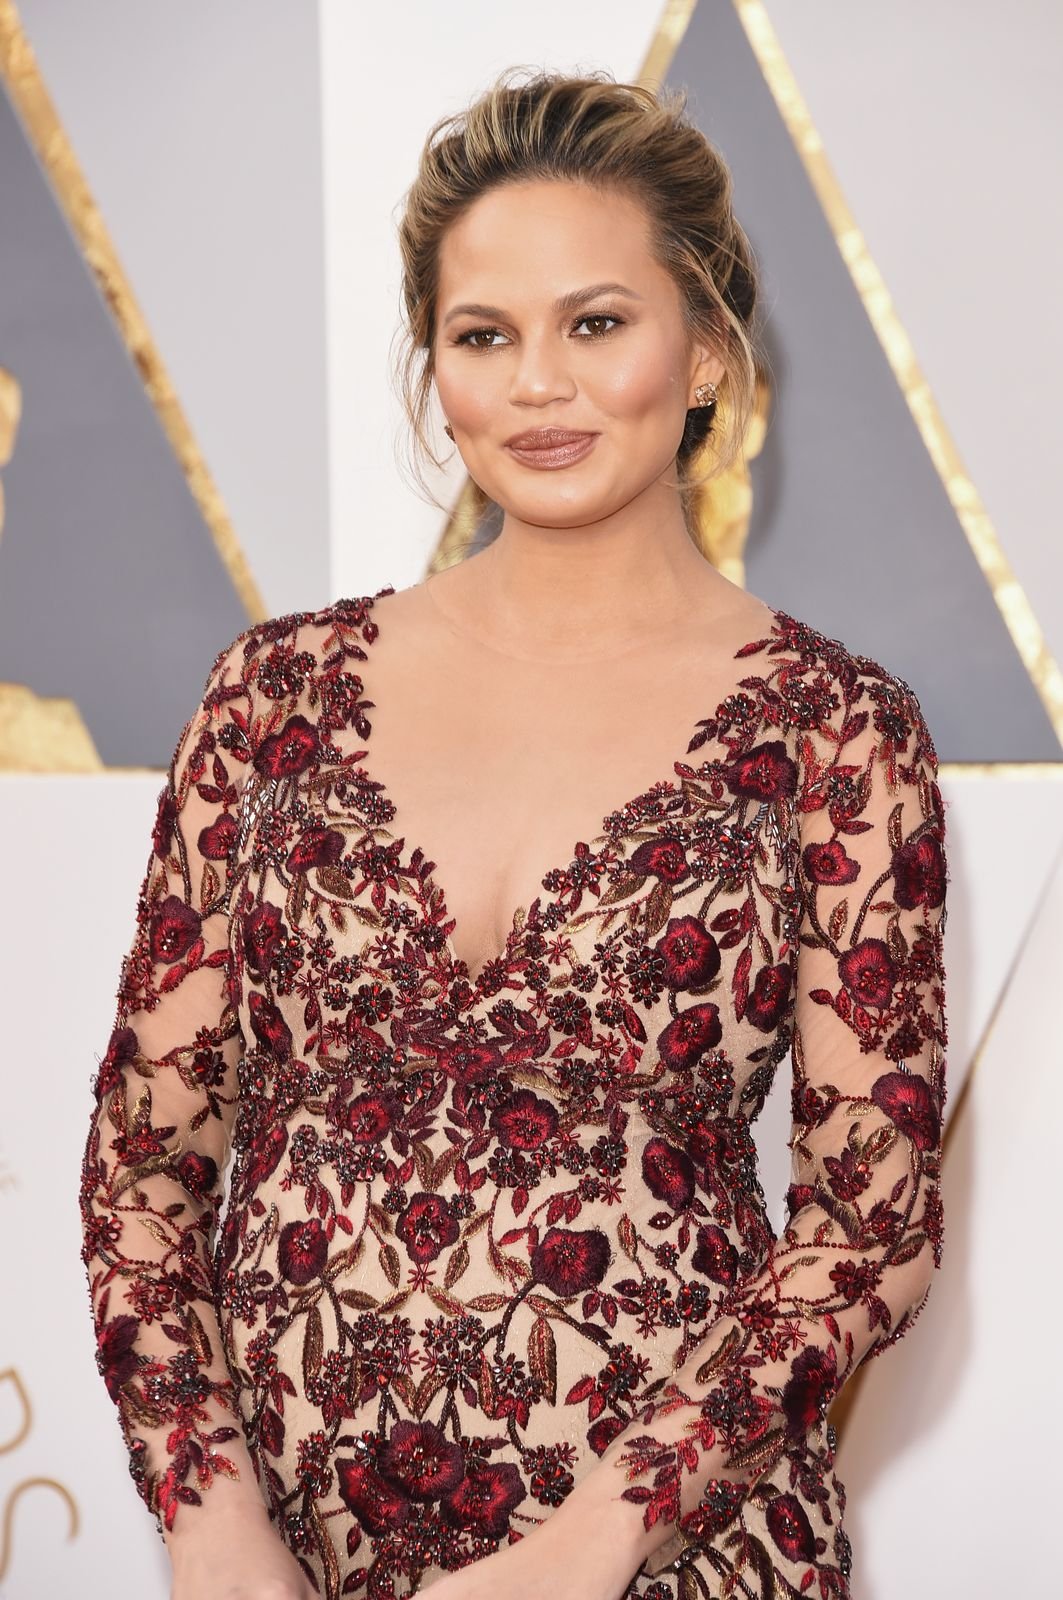 Chrissy Teigen at the 88th Annual Academy Awards on February 28, 2016 in Hollywood, California | Photo: Getty Images